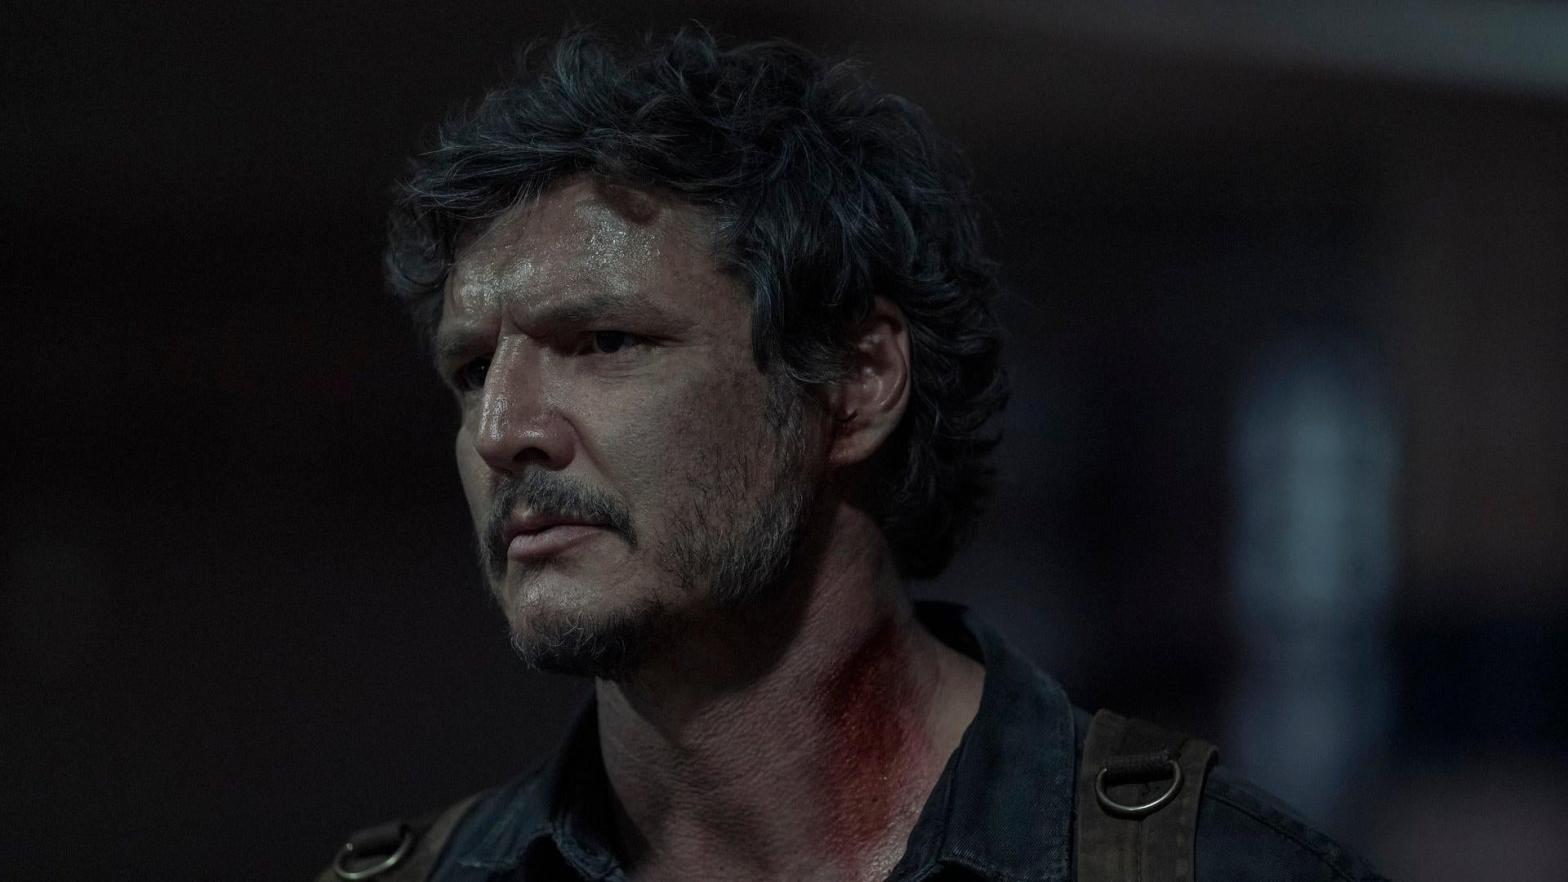 Pedro Pascal on The Last of Us. (Image: HBO)